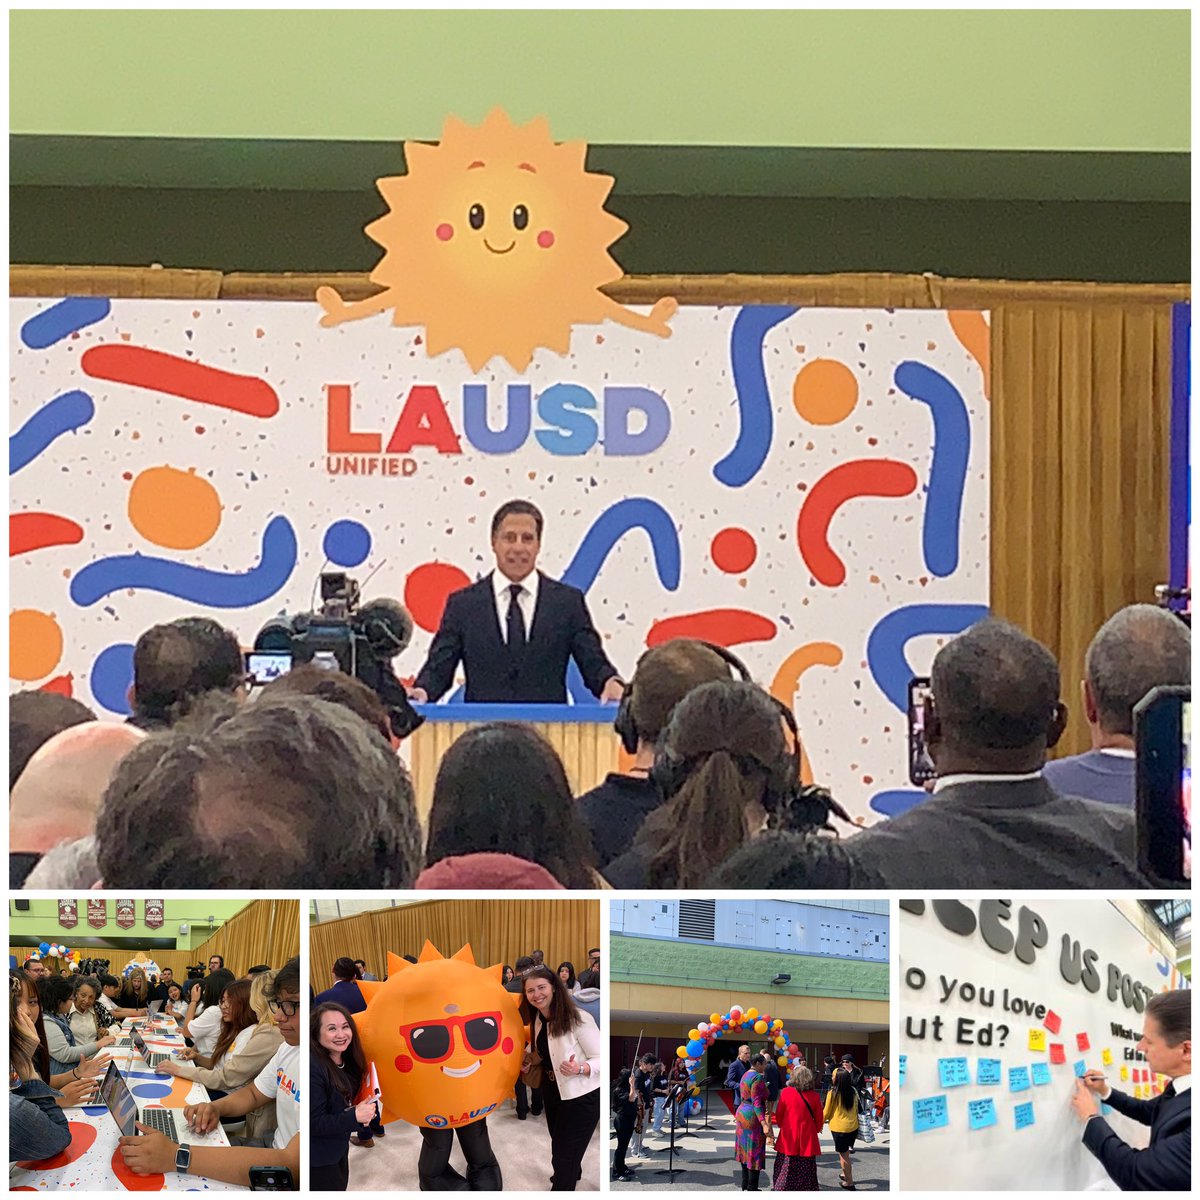 LA USD is the 2nd largest and one of the most diverse districts in the US. Under the leadership of @LAUSDSup, they are also one of the most innovative. Honored to be part of the launch of their Ed AI-powered chatbot to 55,000 learners today, striving to boost learning, engagement…